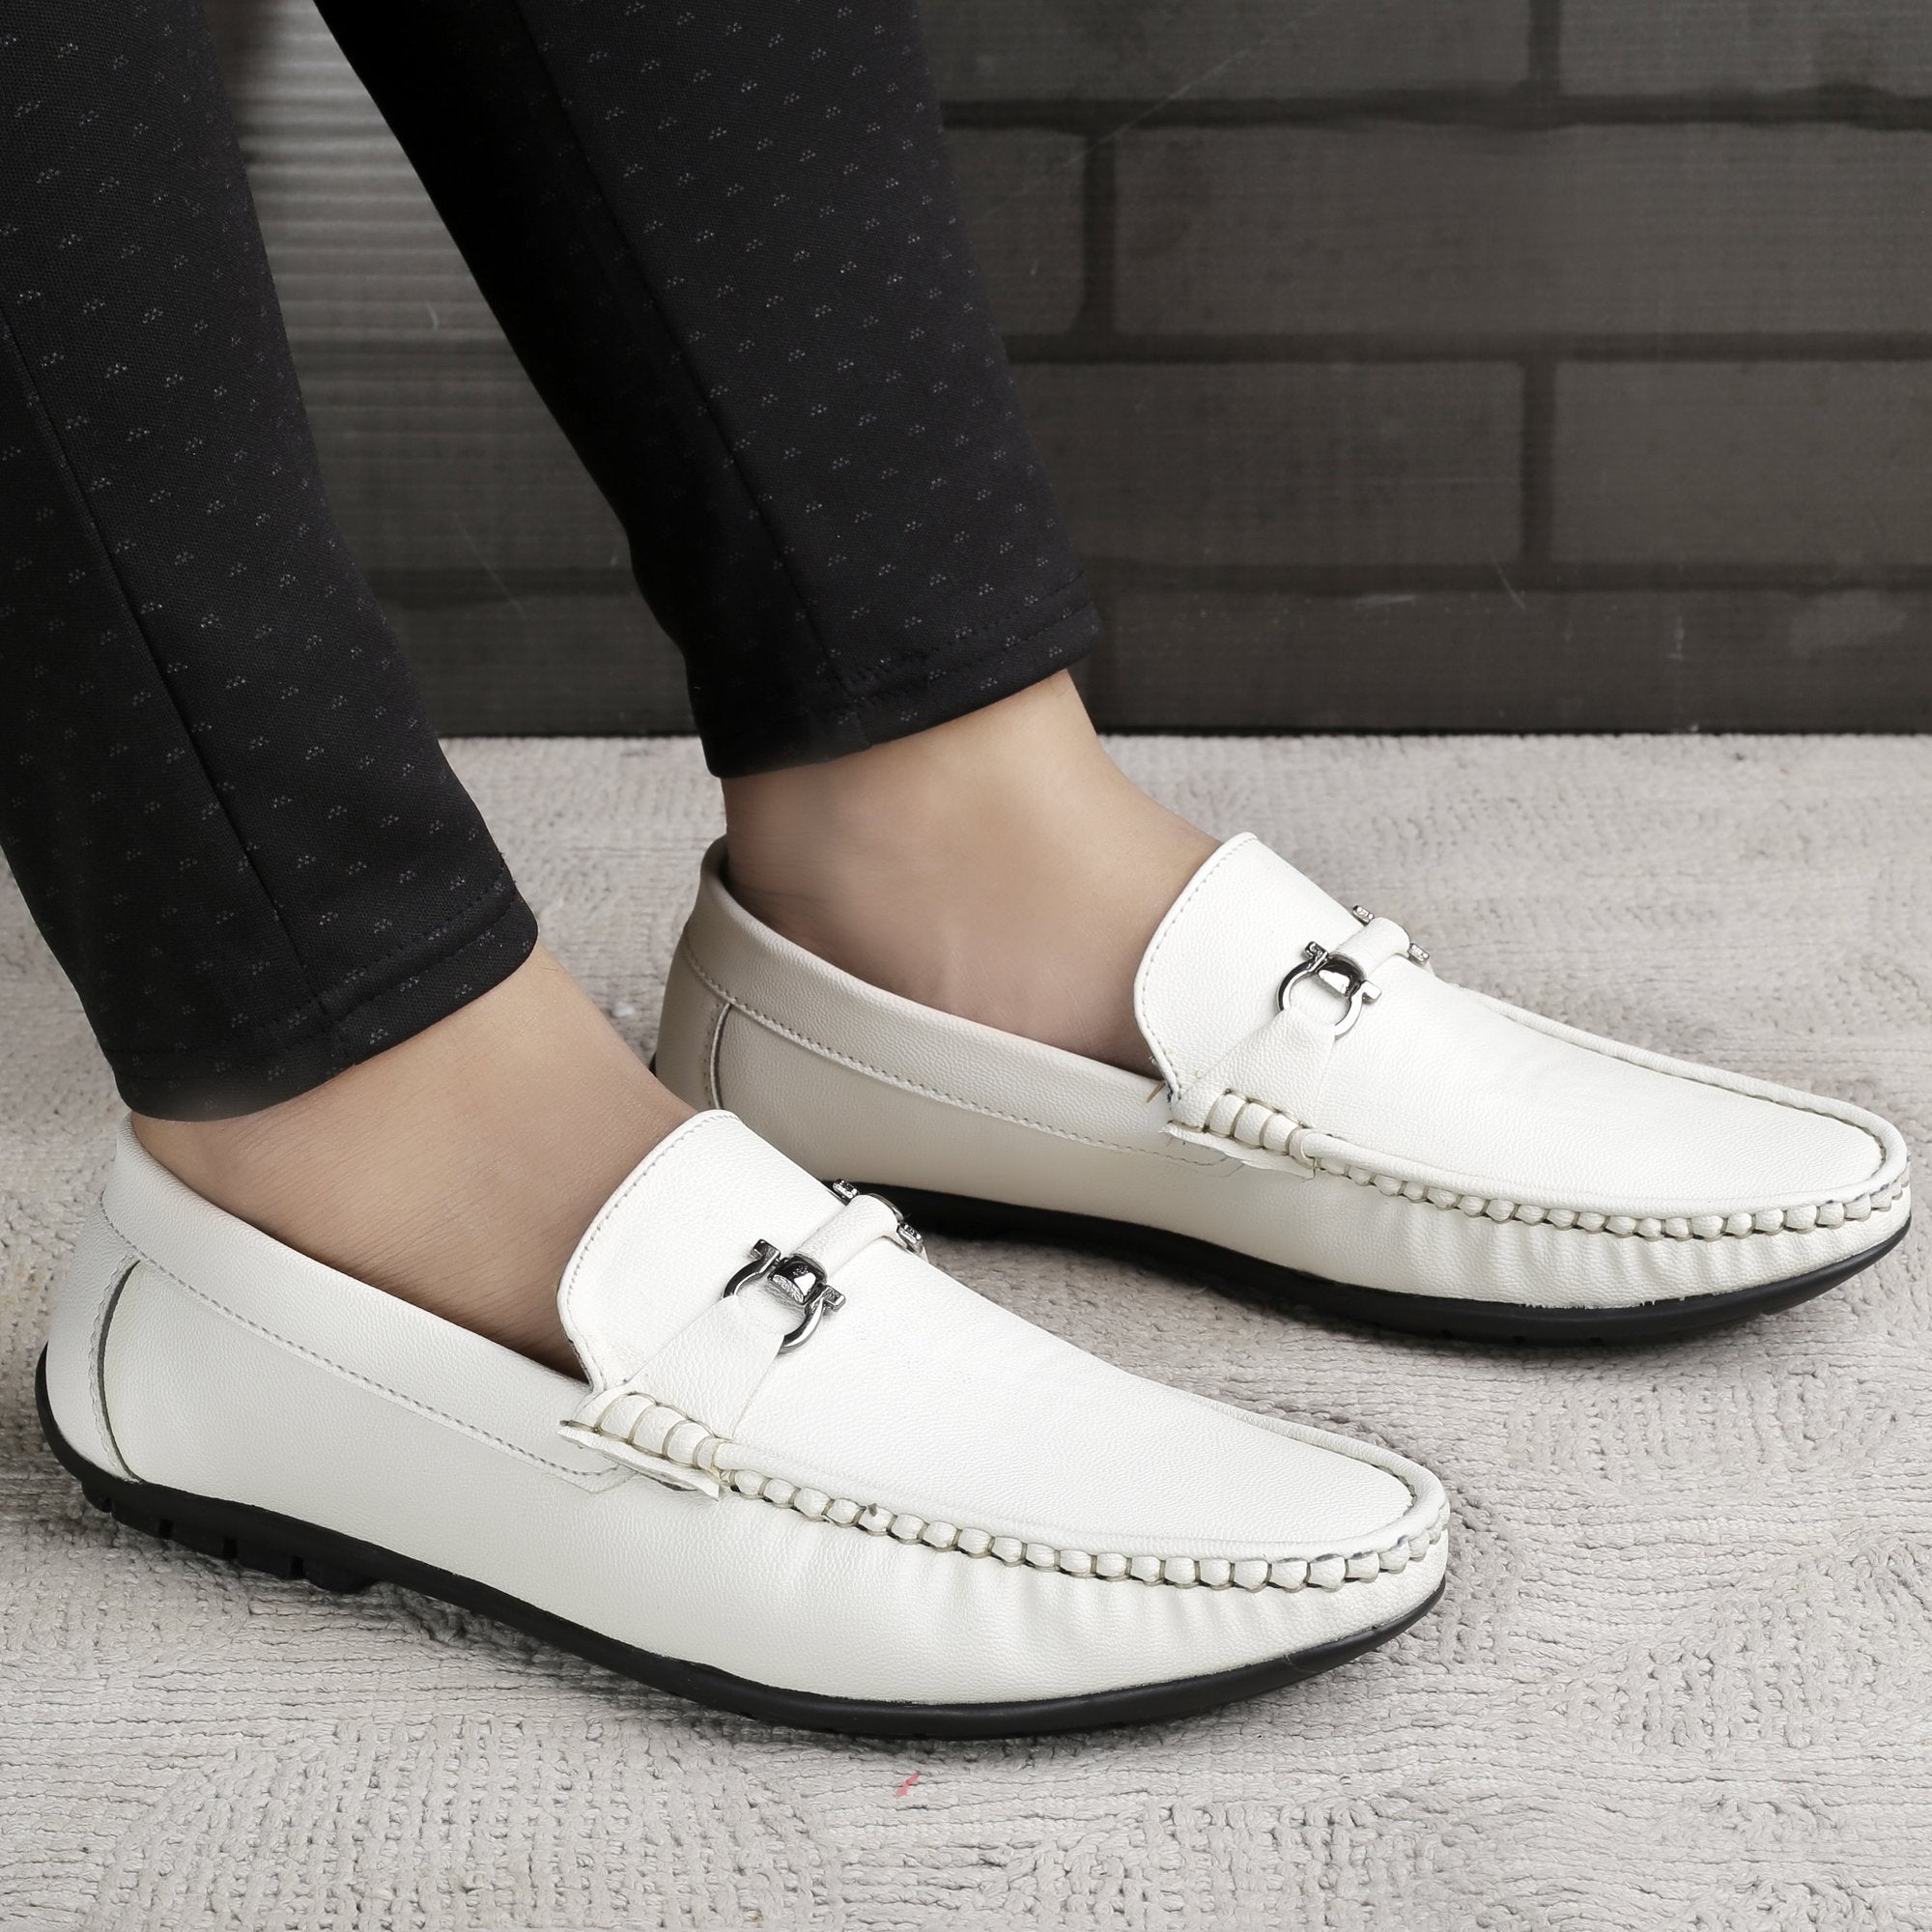 Top 10 Best Loafers Brands In India For Perfect Look - Hiscraves